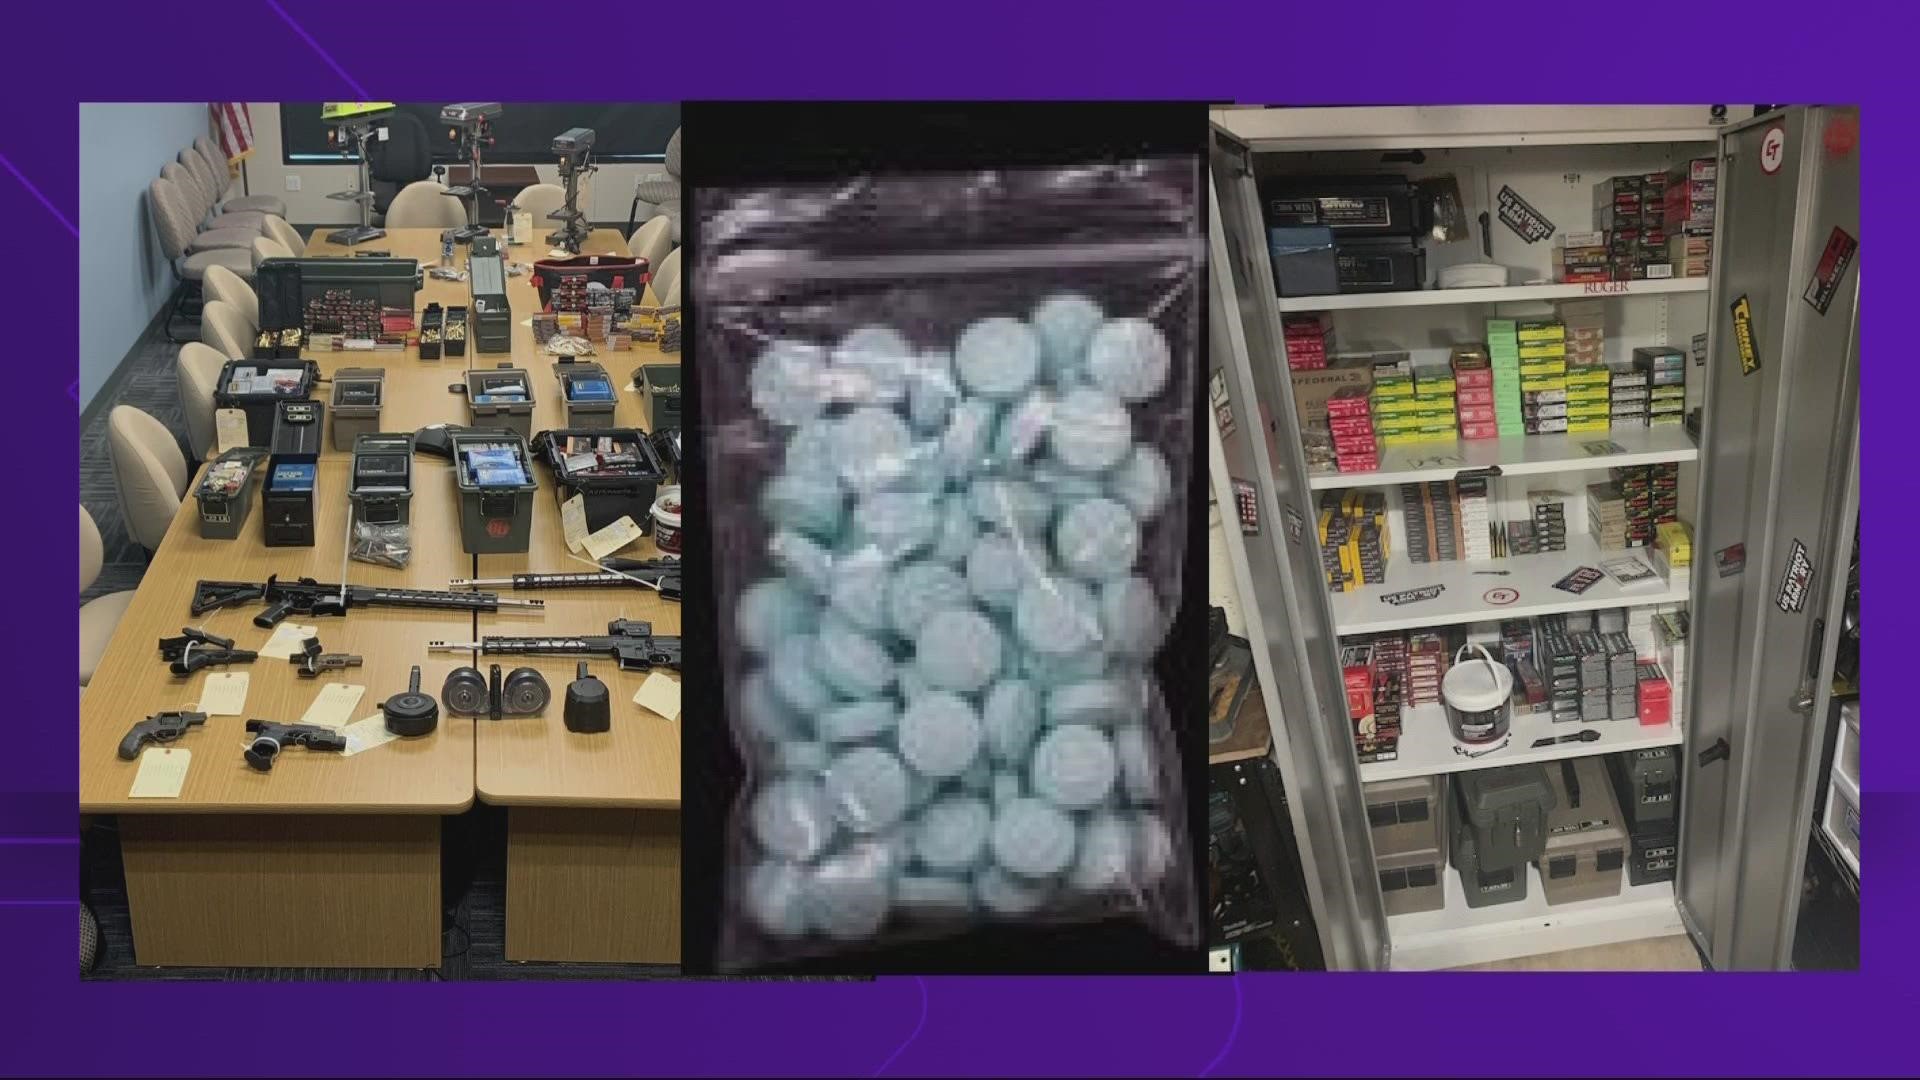 The guns were all connected to a single person. Agents also found about 200 counterfeit oxycontin pills believed to be manufactured with fentanyl.